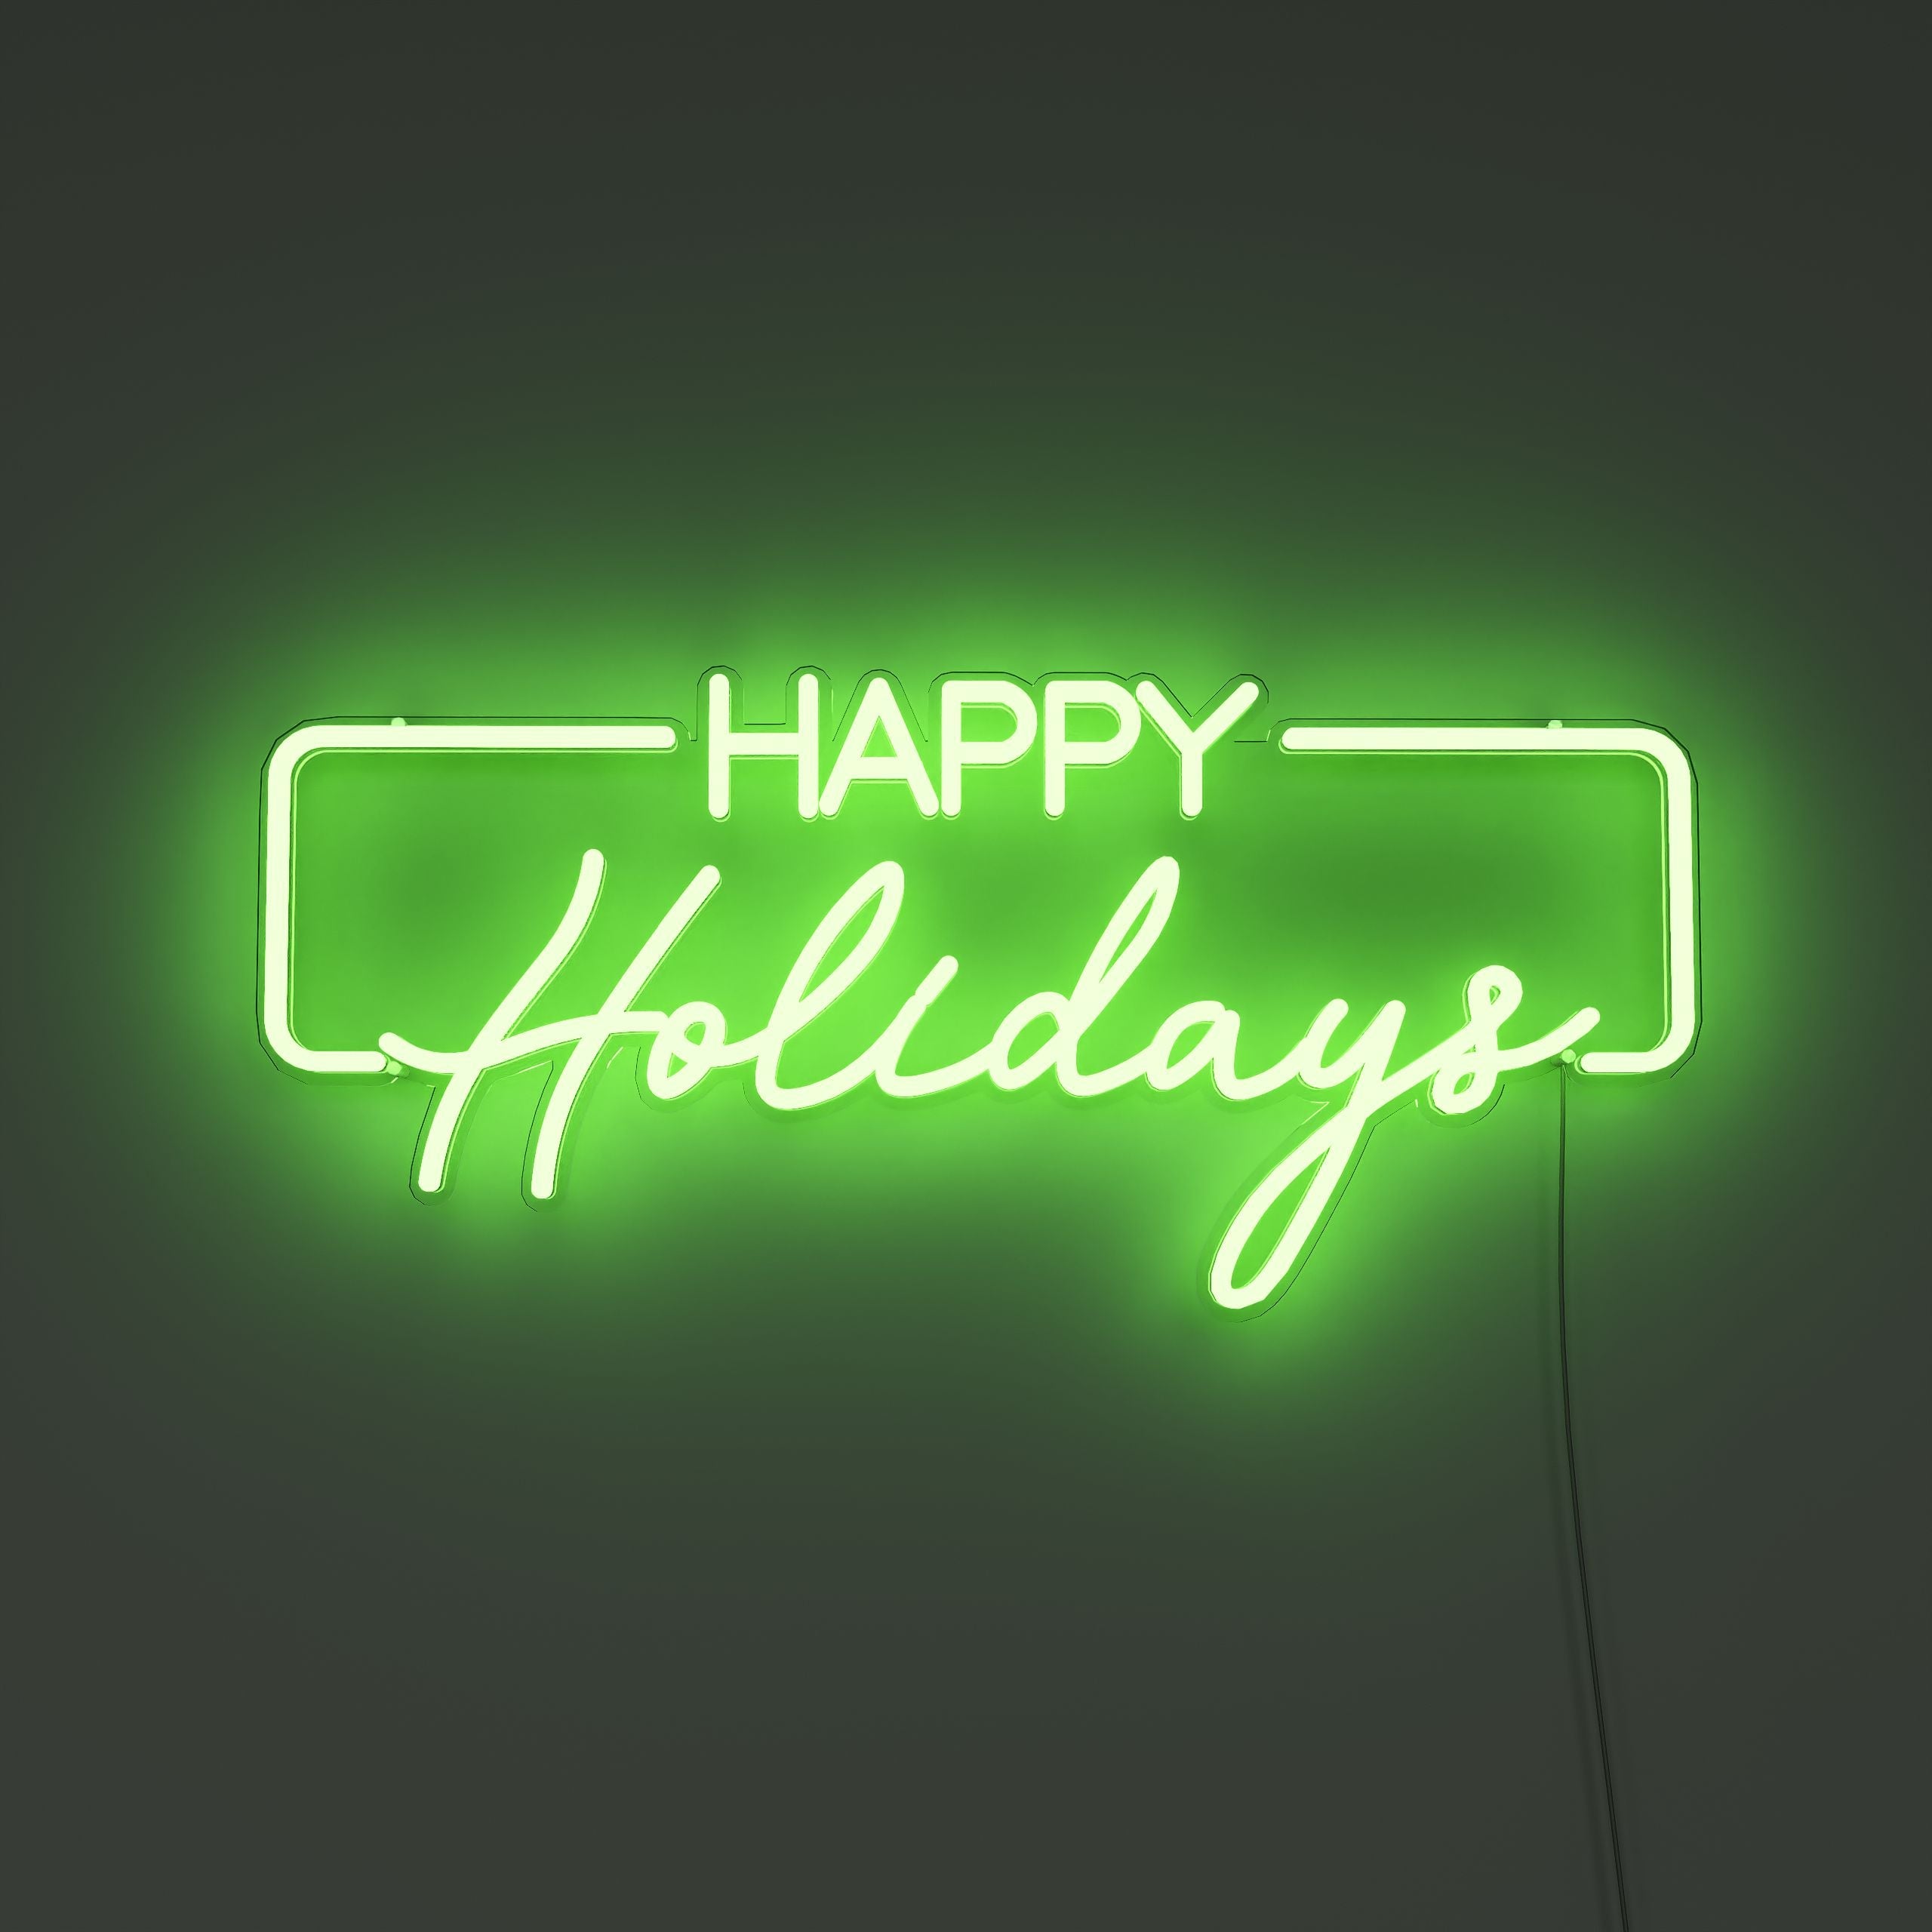 celebrate-holidays-here-neon-sign-lite